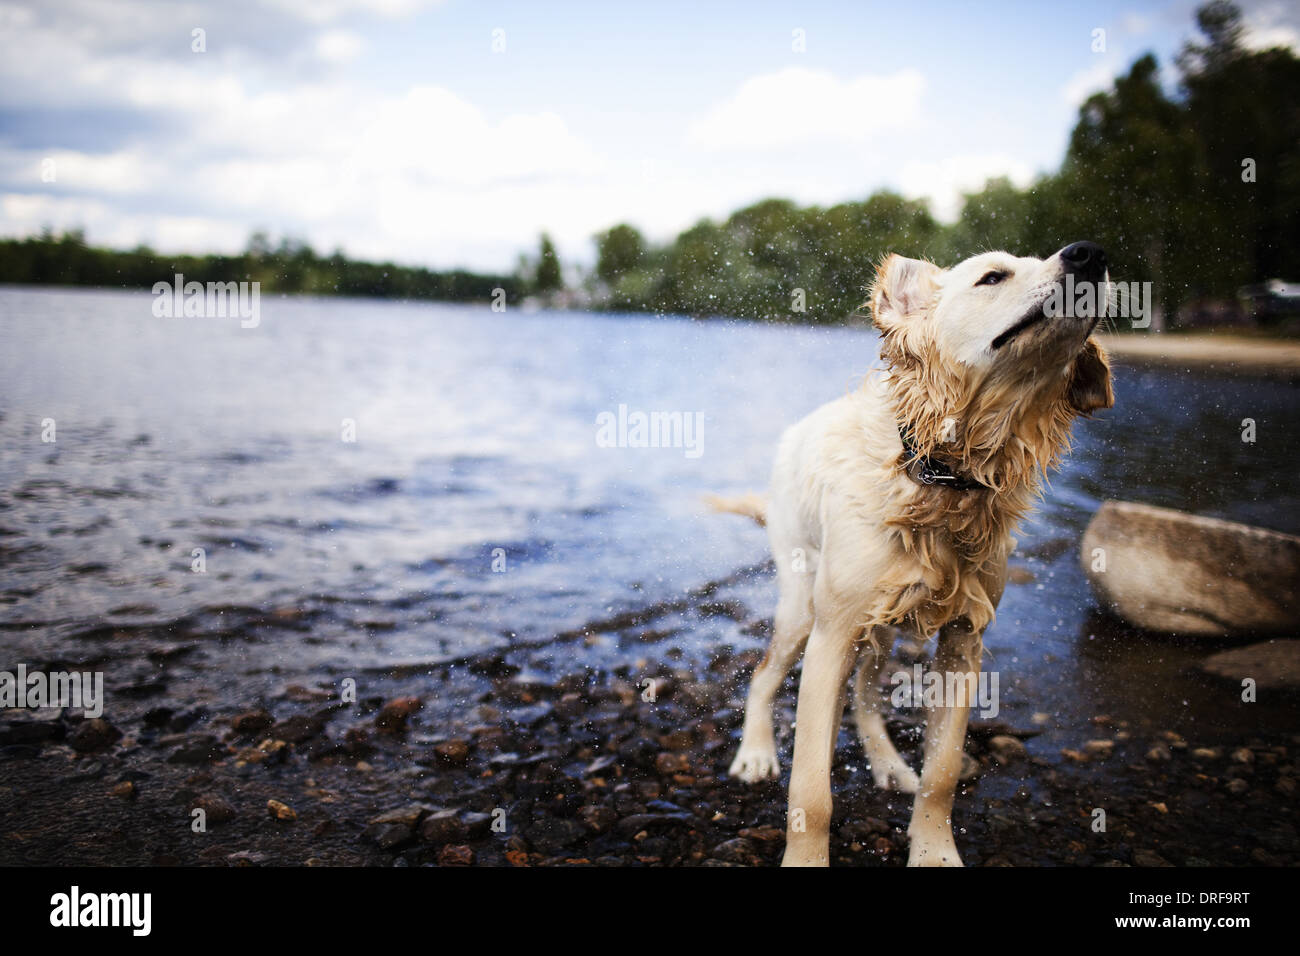 USA wet dog with long hair family pet shaking itself Stock Photo